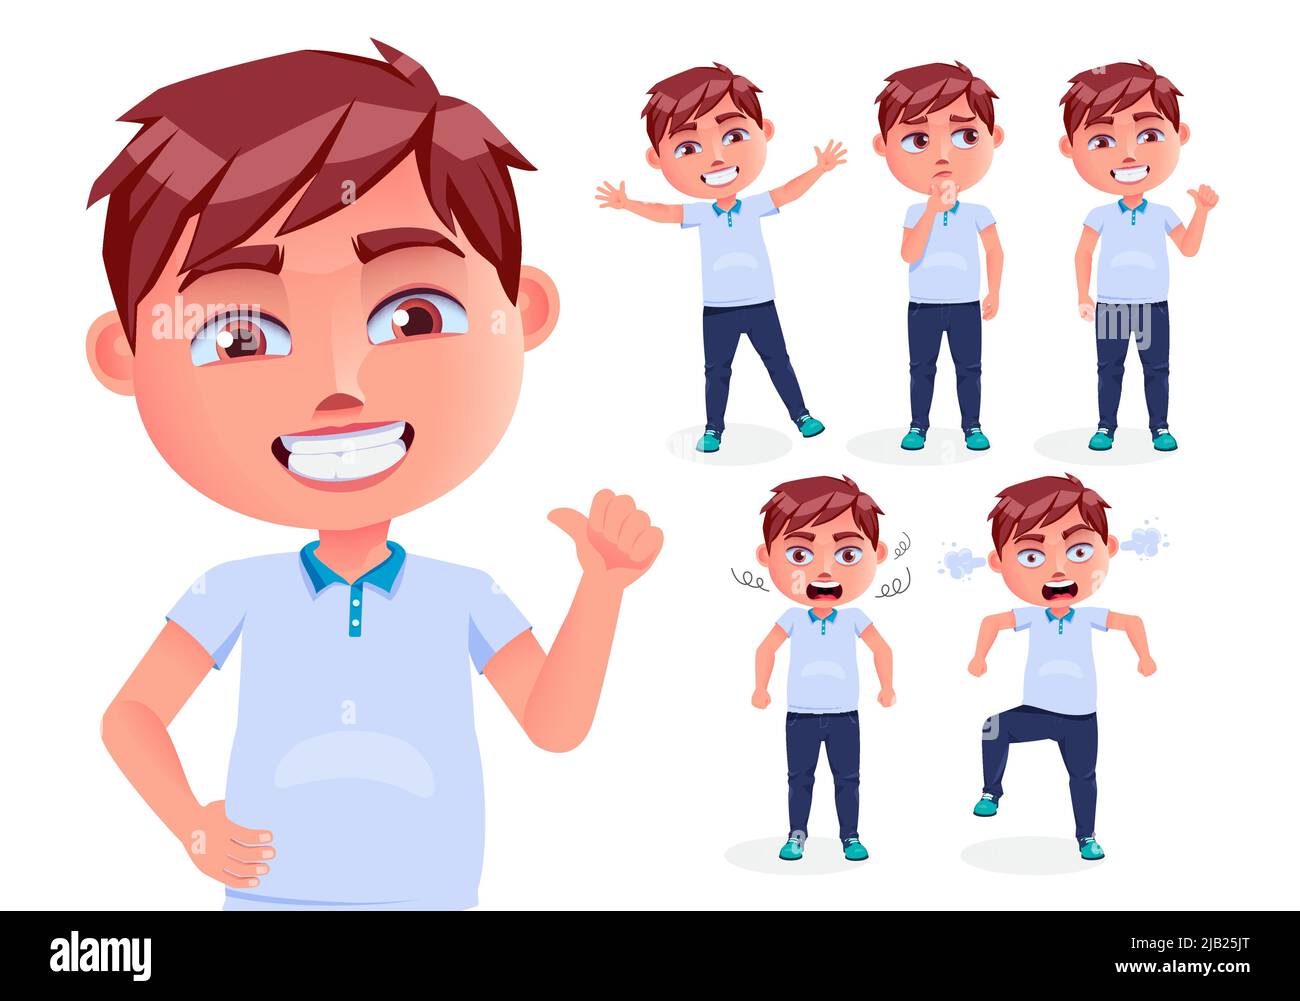 Boy kid vector character set design. Male school characters with standing, smiling and shouting gesture and facial expression for friendly back. Stock Vector